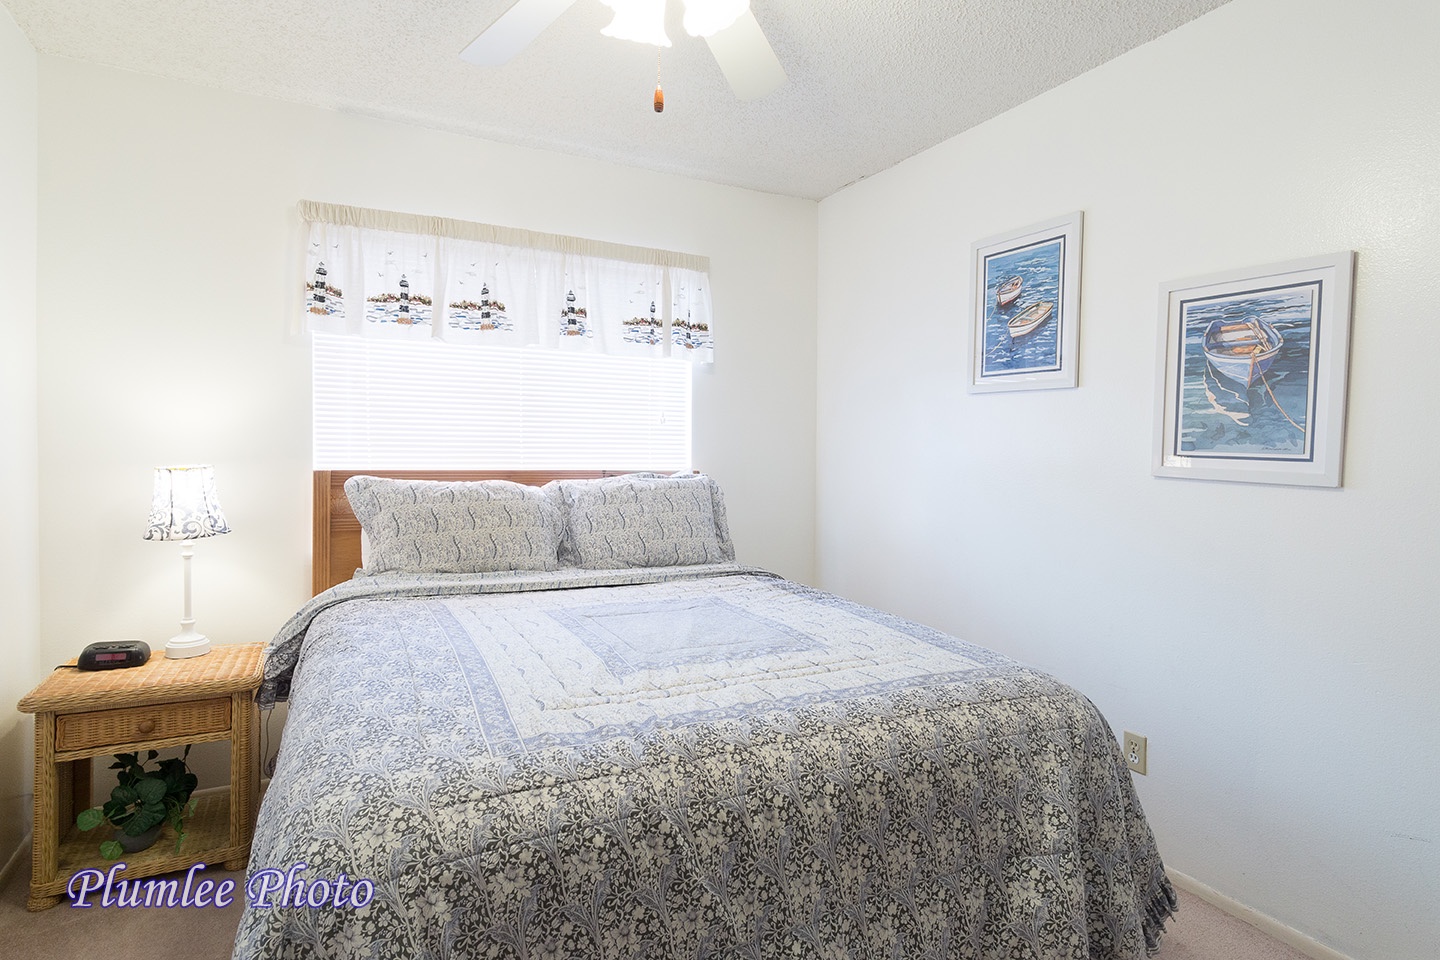 The Third Bedroom has a queen size bed and an overhead fan.